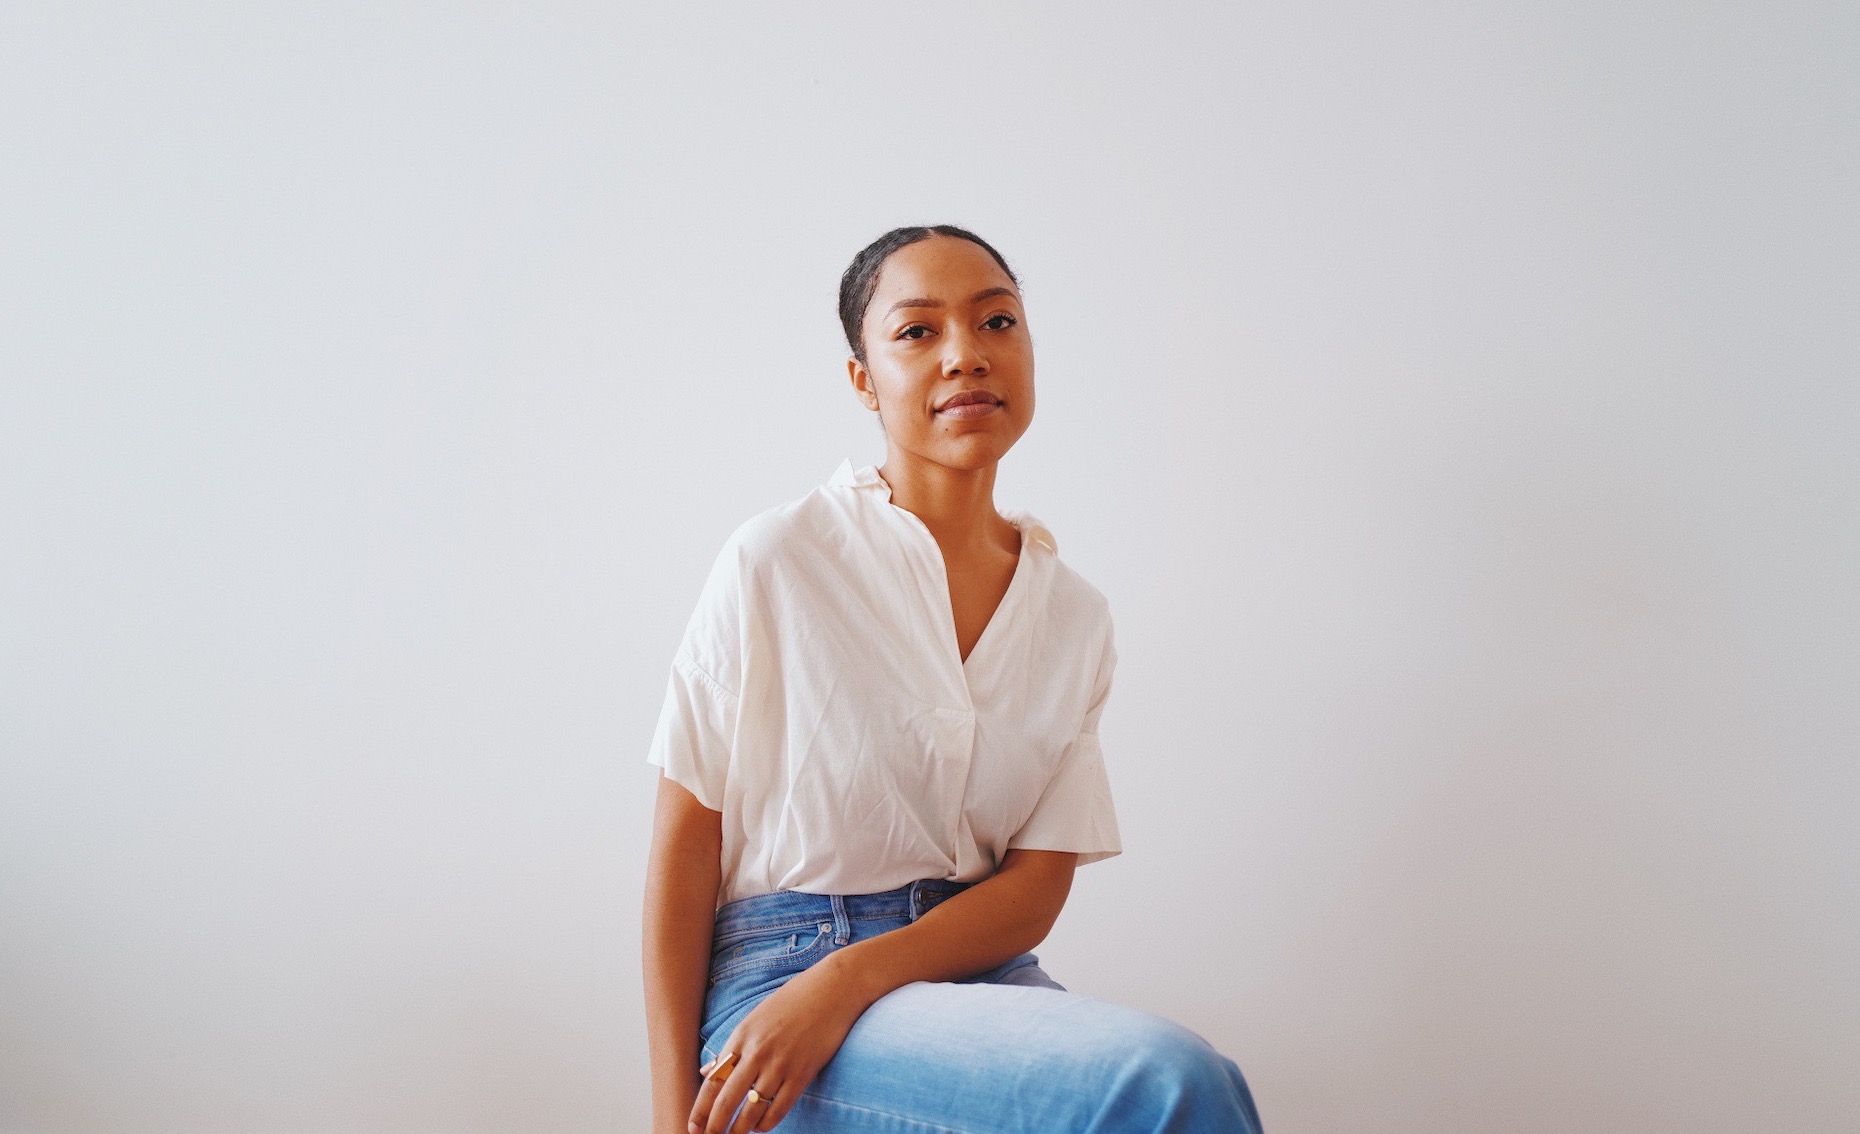 Image of woman wearing a white shirt sitting in front of a white and grey background.